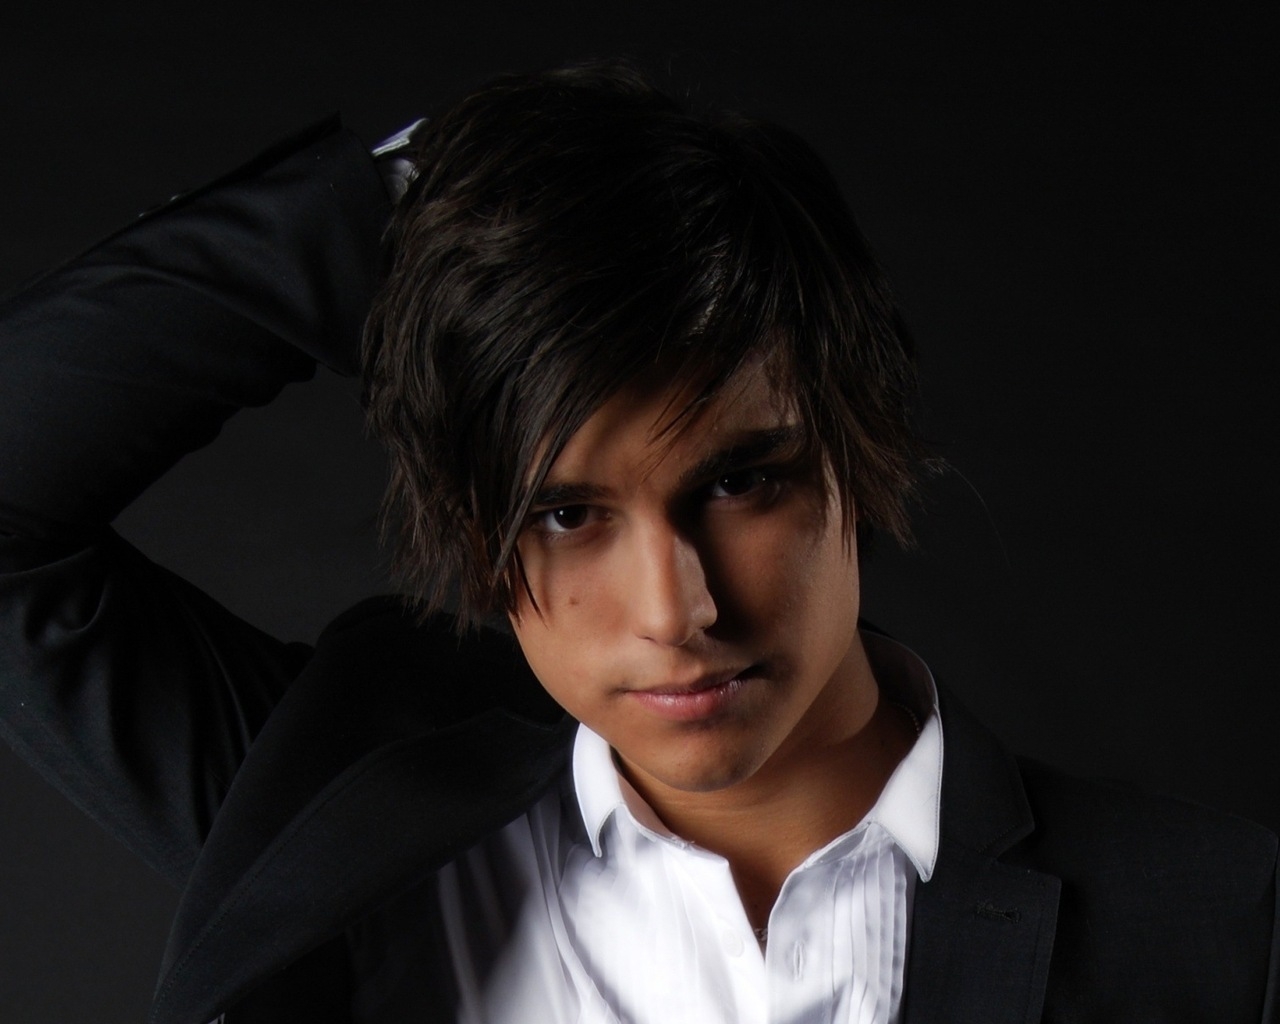 Eric Saade for 1280 x 1024 resolution